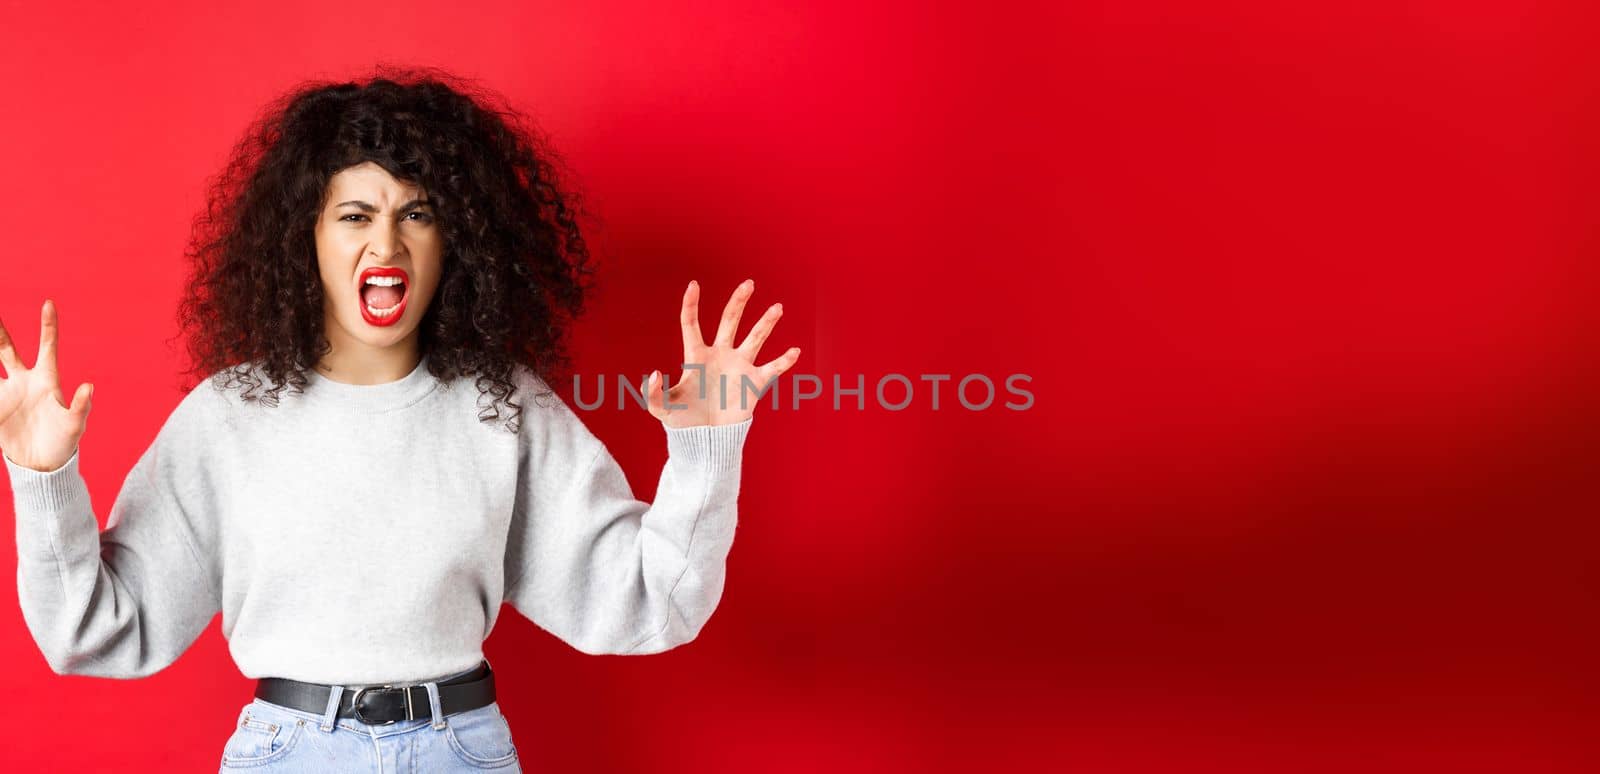 Scary woman trying to scare you, shouting and showing animal claws gesture, screaming at person, standing against red background.